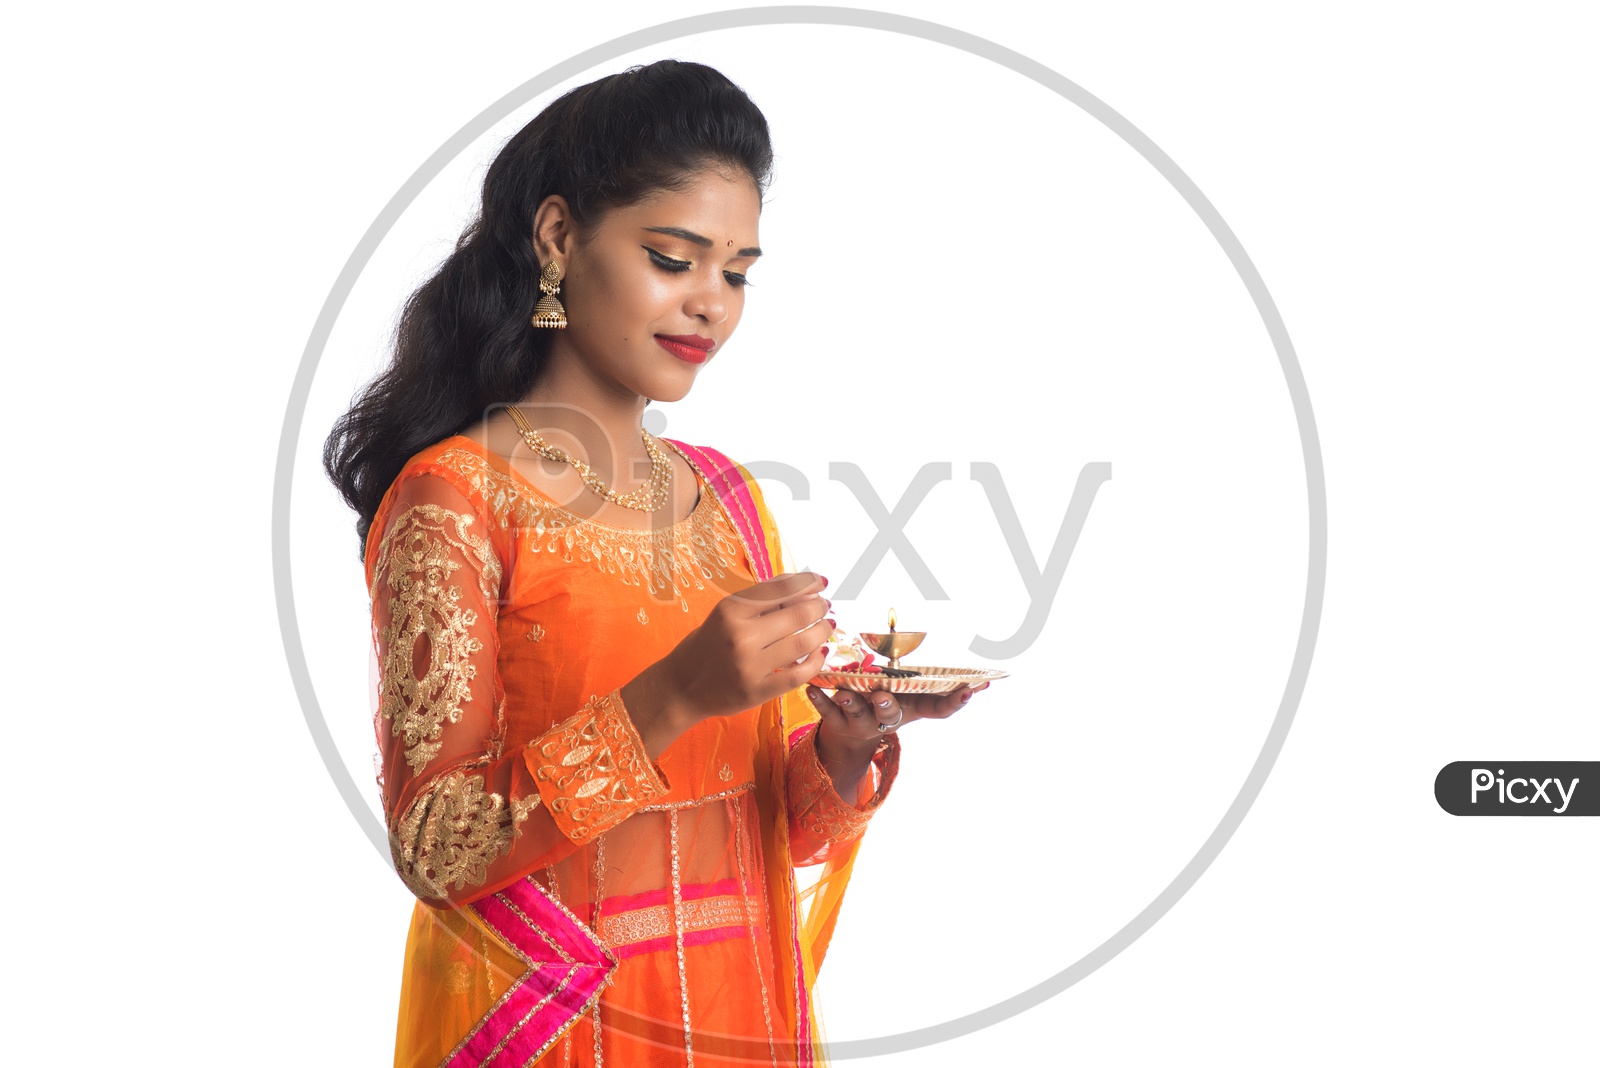 A Young Indian Traditional Woman With Pooja Thali Or Pooja Plates Holding In Hand and Performing Pooja With Smile Face On an Isolated White Background